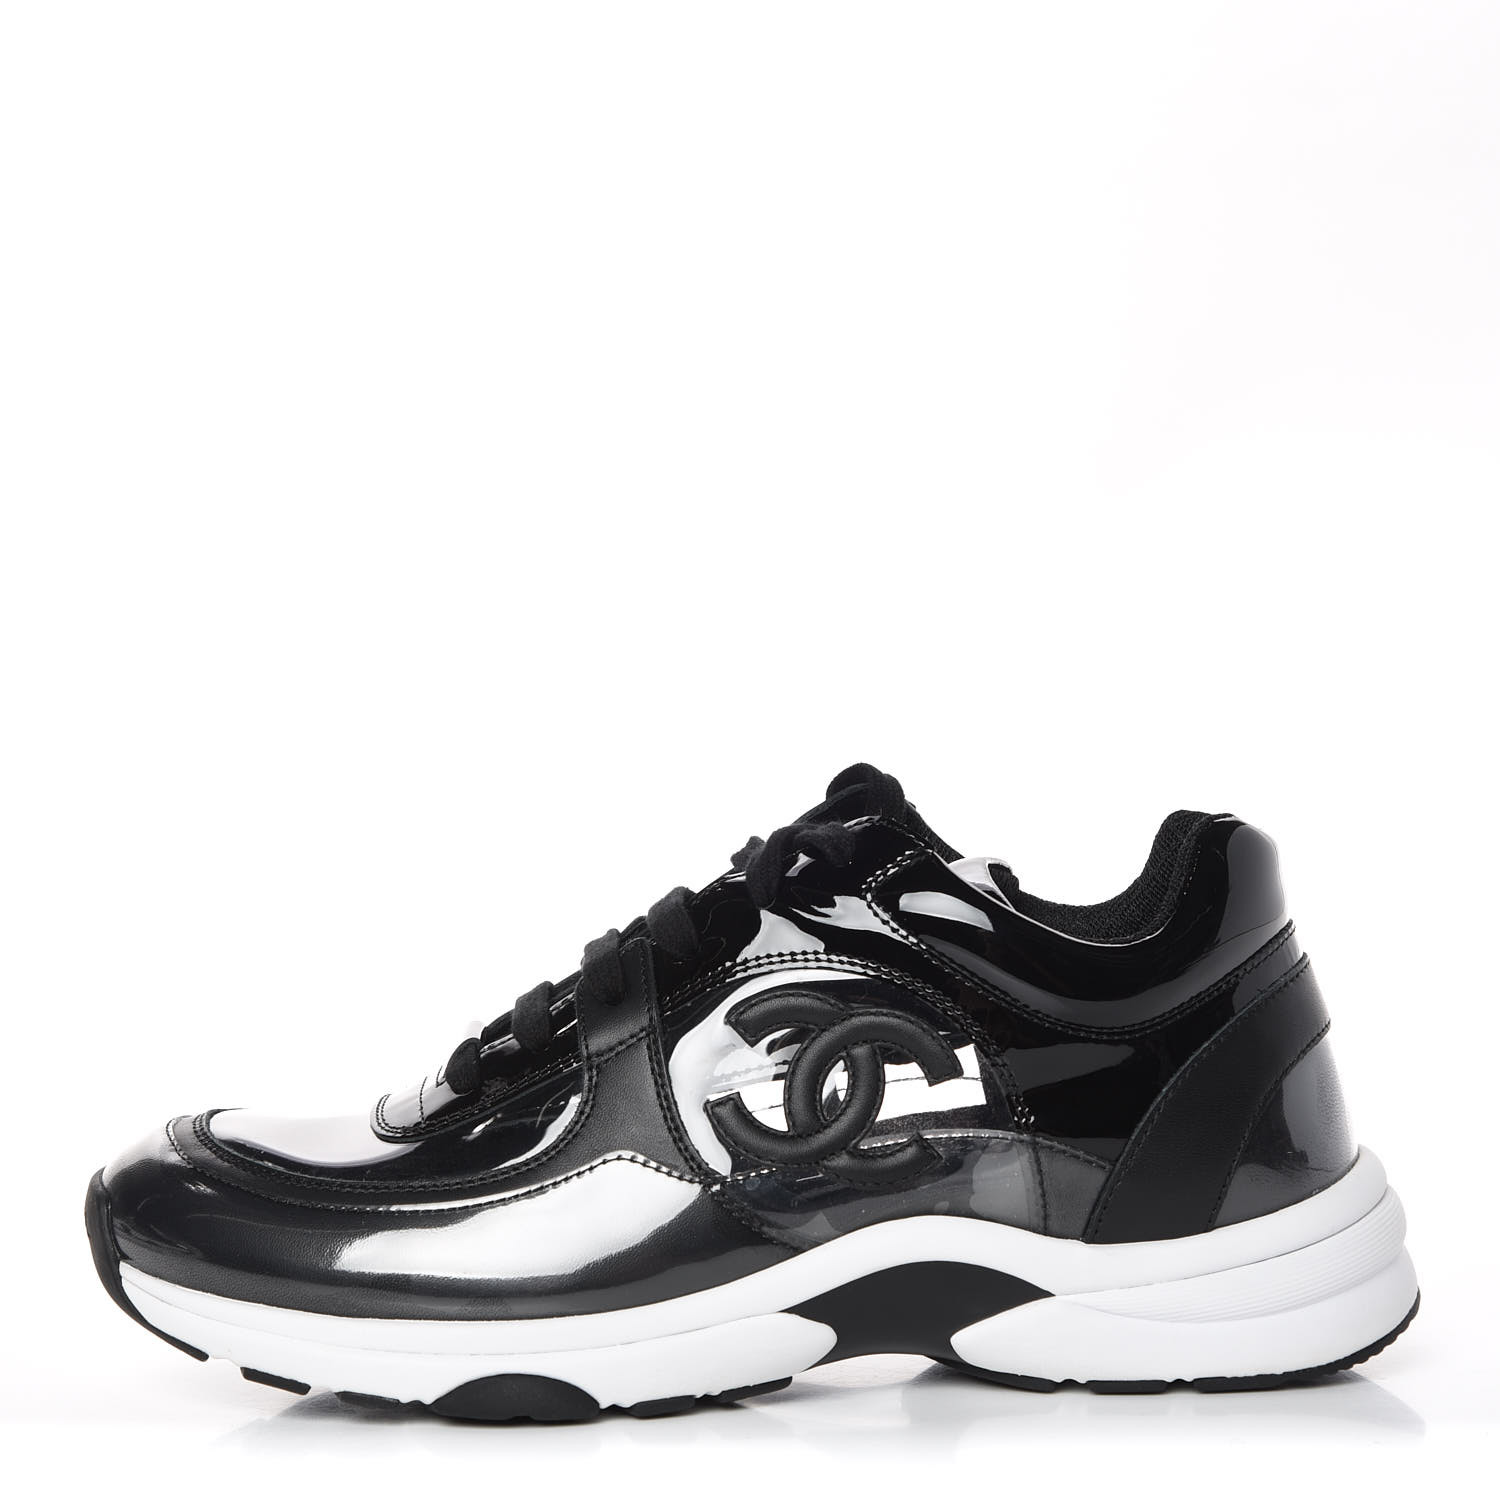 clear chanel sneakers